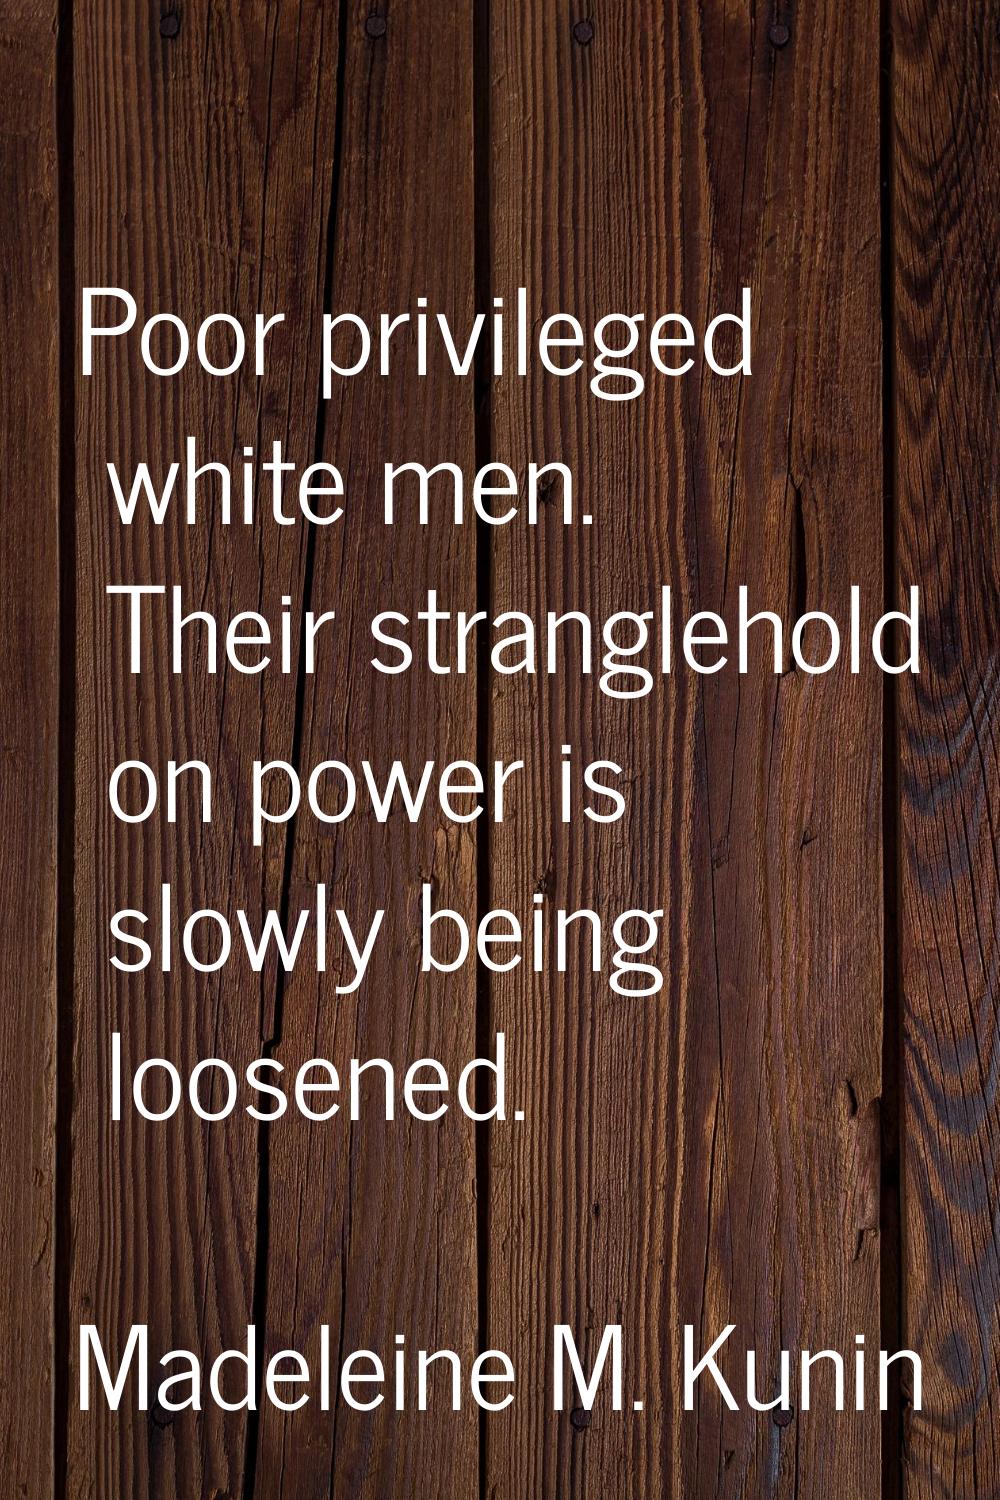 Poor privileged white men. Their stranglehold on power is slowly being loosened.